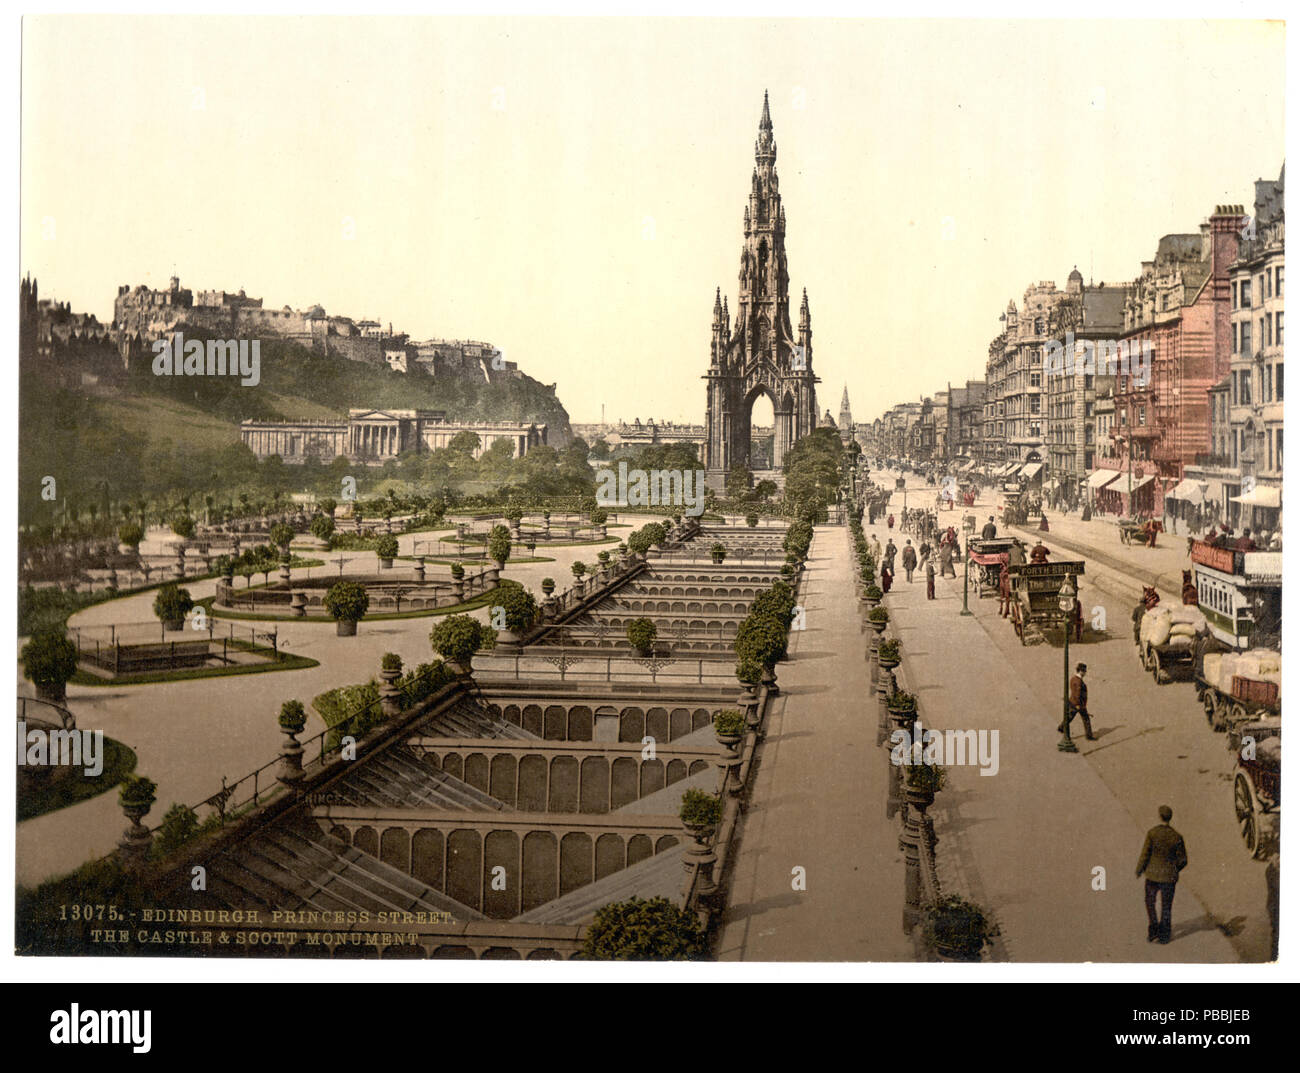 . Princess Street (i.e. Princes Street), the castle, and Scott Monument, Edinburgh, Scotland. Print no. '13075'.; Title from the Detroit Publishing Co., catalogue J-foreign section. Detroit, Mich. : Detroit Photographic Company, 1905.; More information about the Photochrom Print Collection is available at http://hdl.loc.gov/loc.pnp/pp.pgz; Forms part of: Views of landscape and architecture in Scotland in the Photochrom print collection.. between 1890 and 1900 1227 Princess Street (i.e. Princes Street), the castle, and Scott Monument, Edinburgh, Scotland-LCCN2001705995 Stock Photo